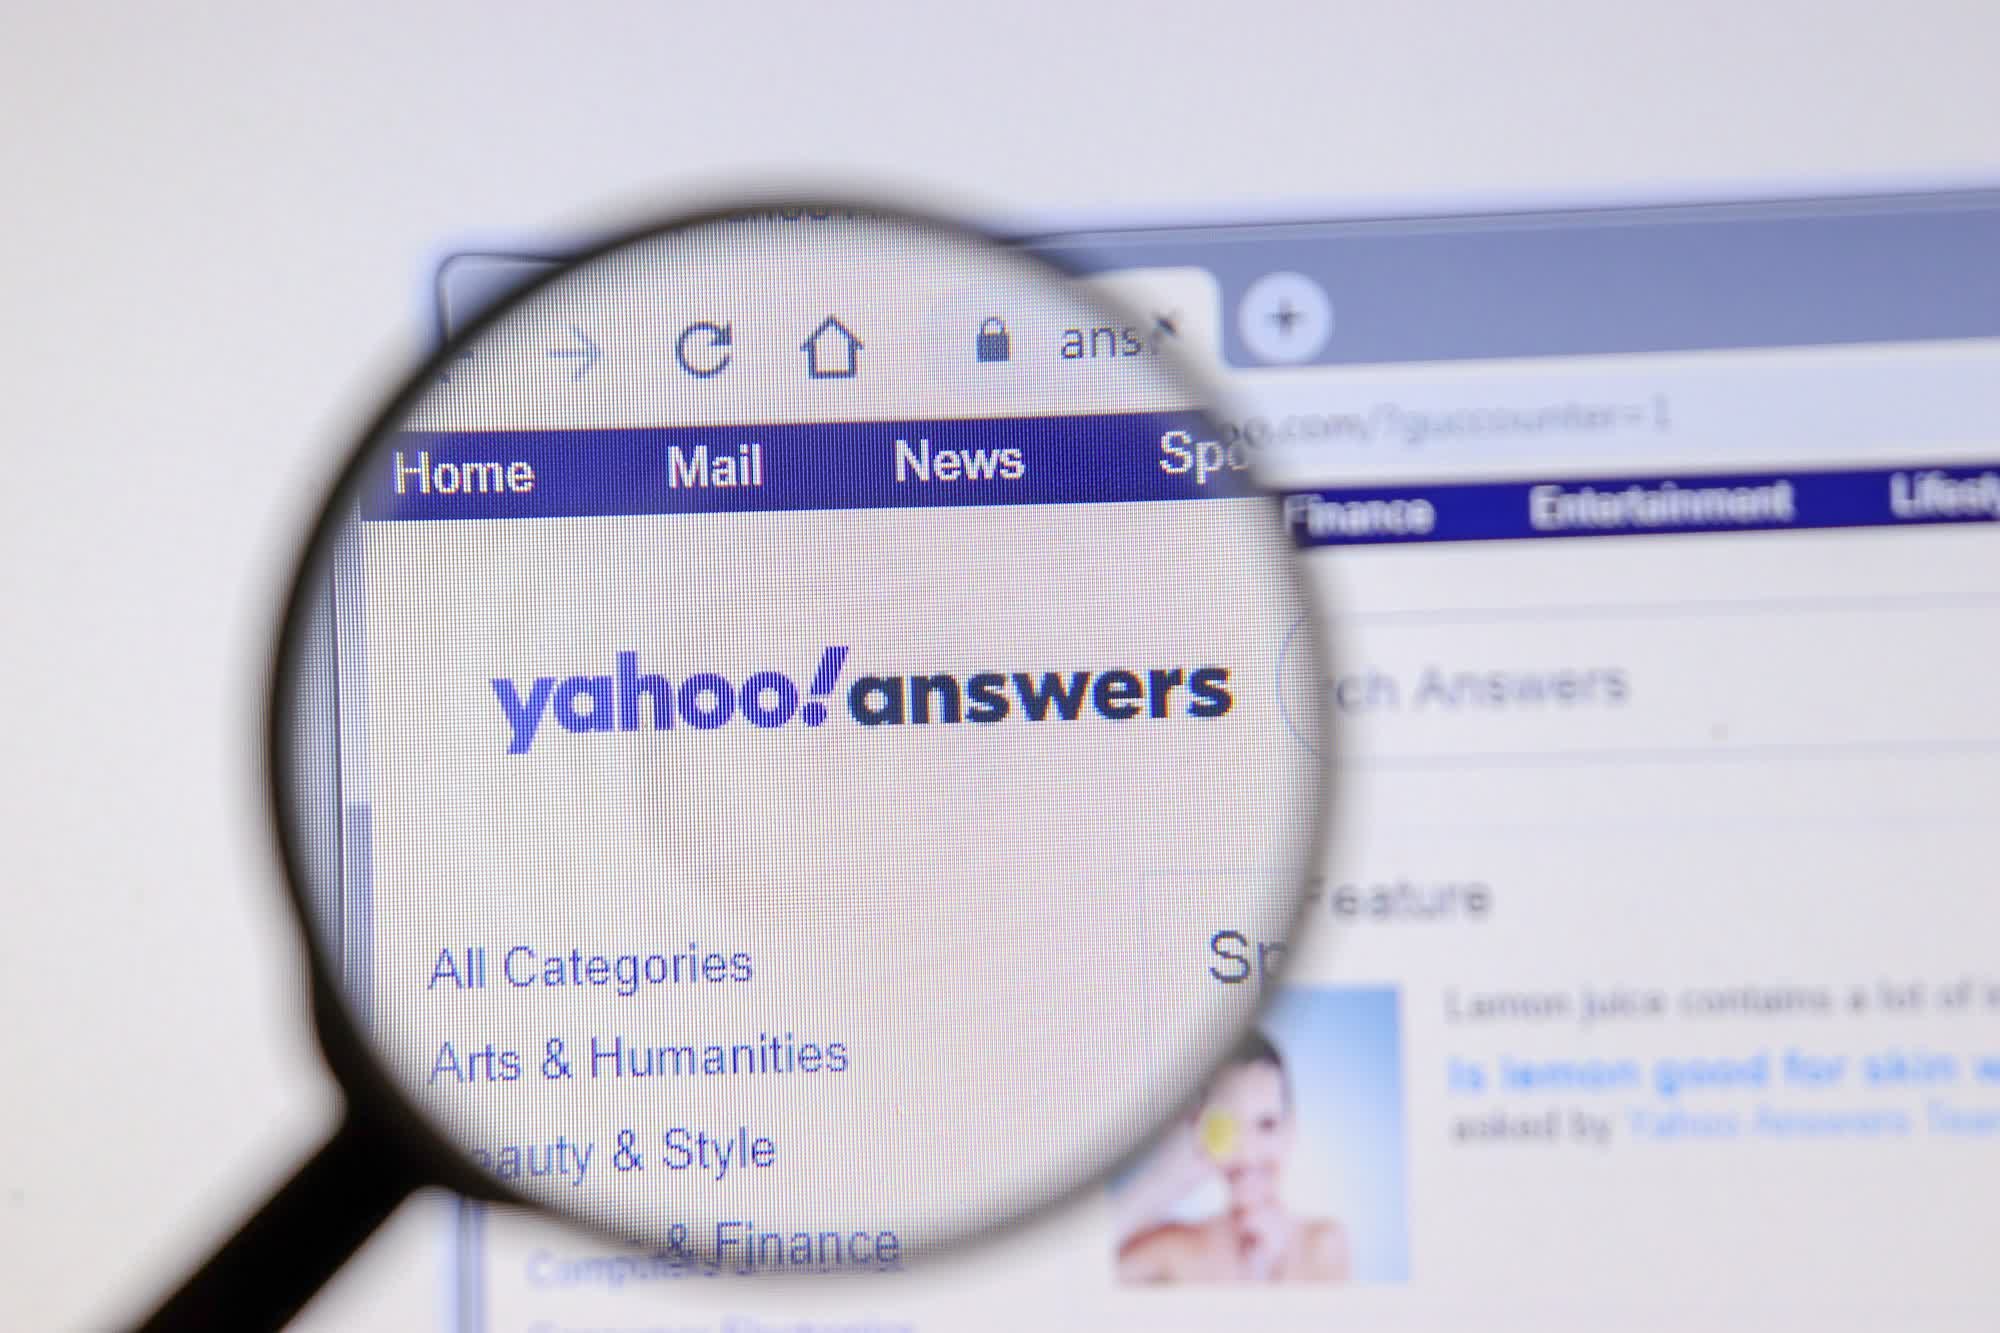 Yahoo Answers is shutting down after 16 years